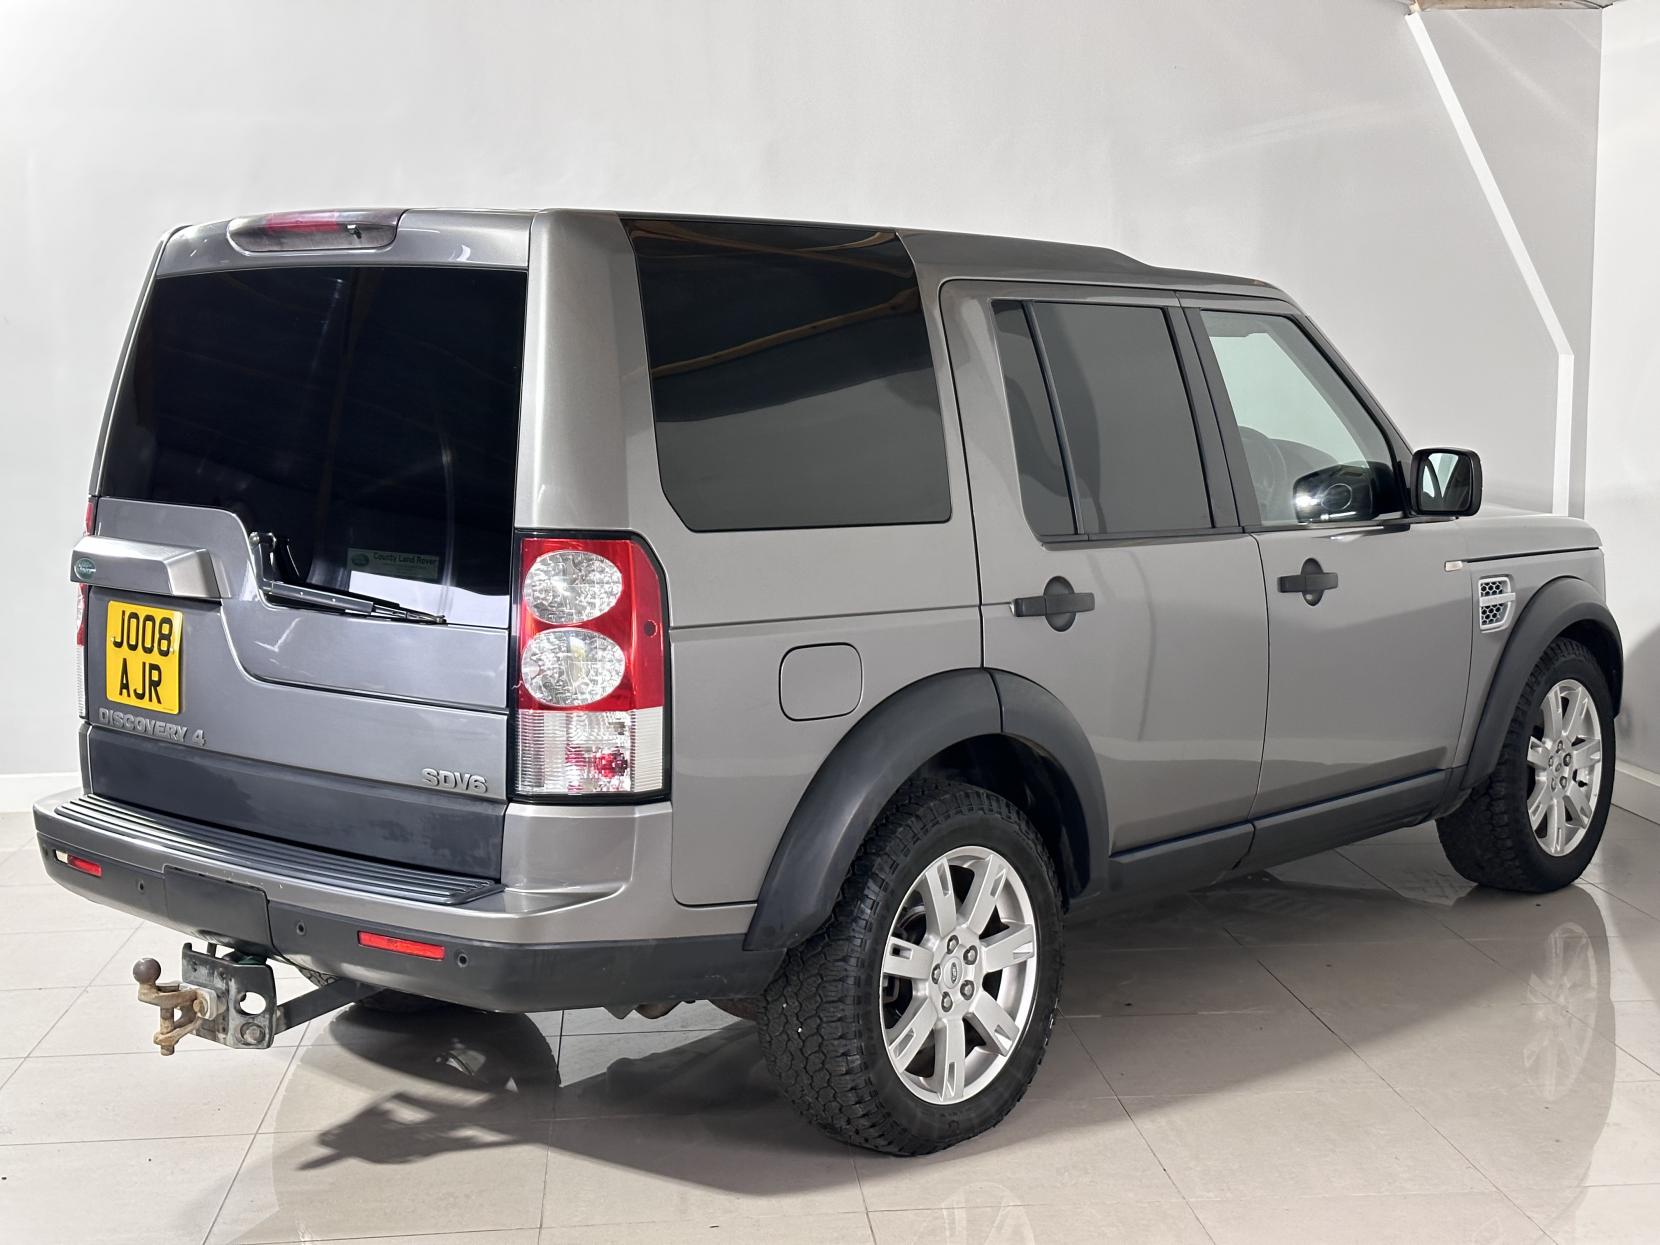 Land Rover Discovery 4 3.0 SD V6 LCV 5dr Diesel Automatic 4X4 (244 g/km, 245 bhp)